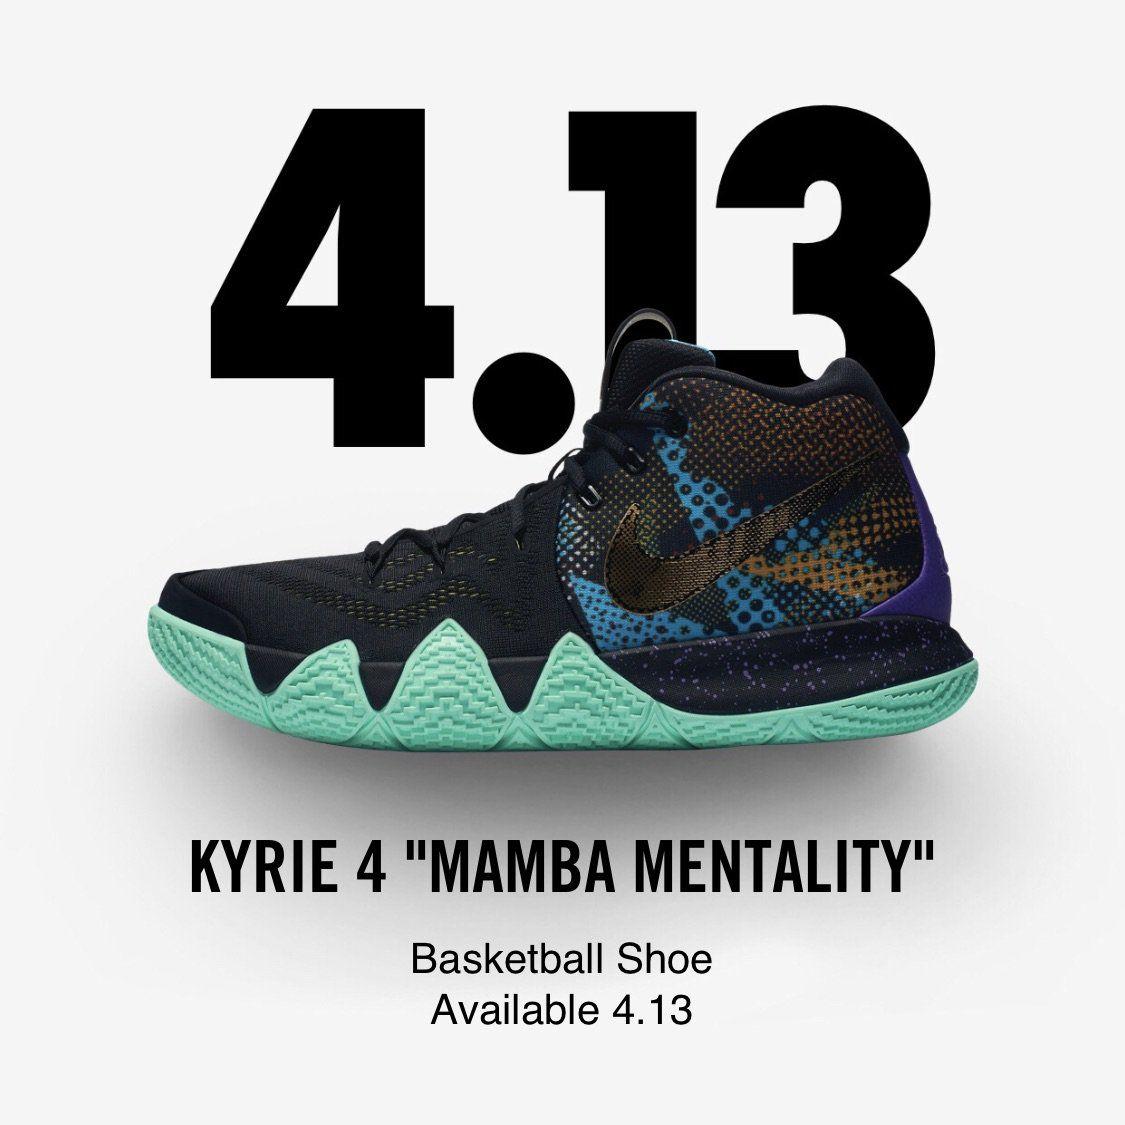 J23 iPhone App PG 2 “Mamba Mentality” official